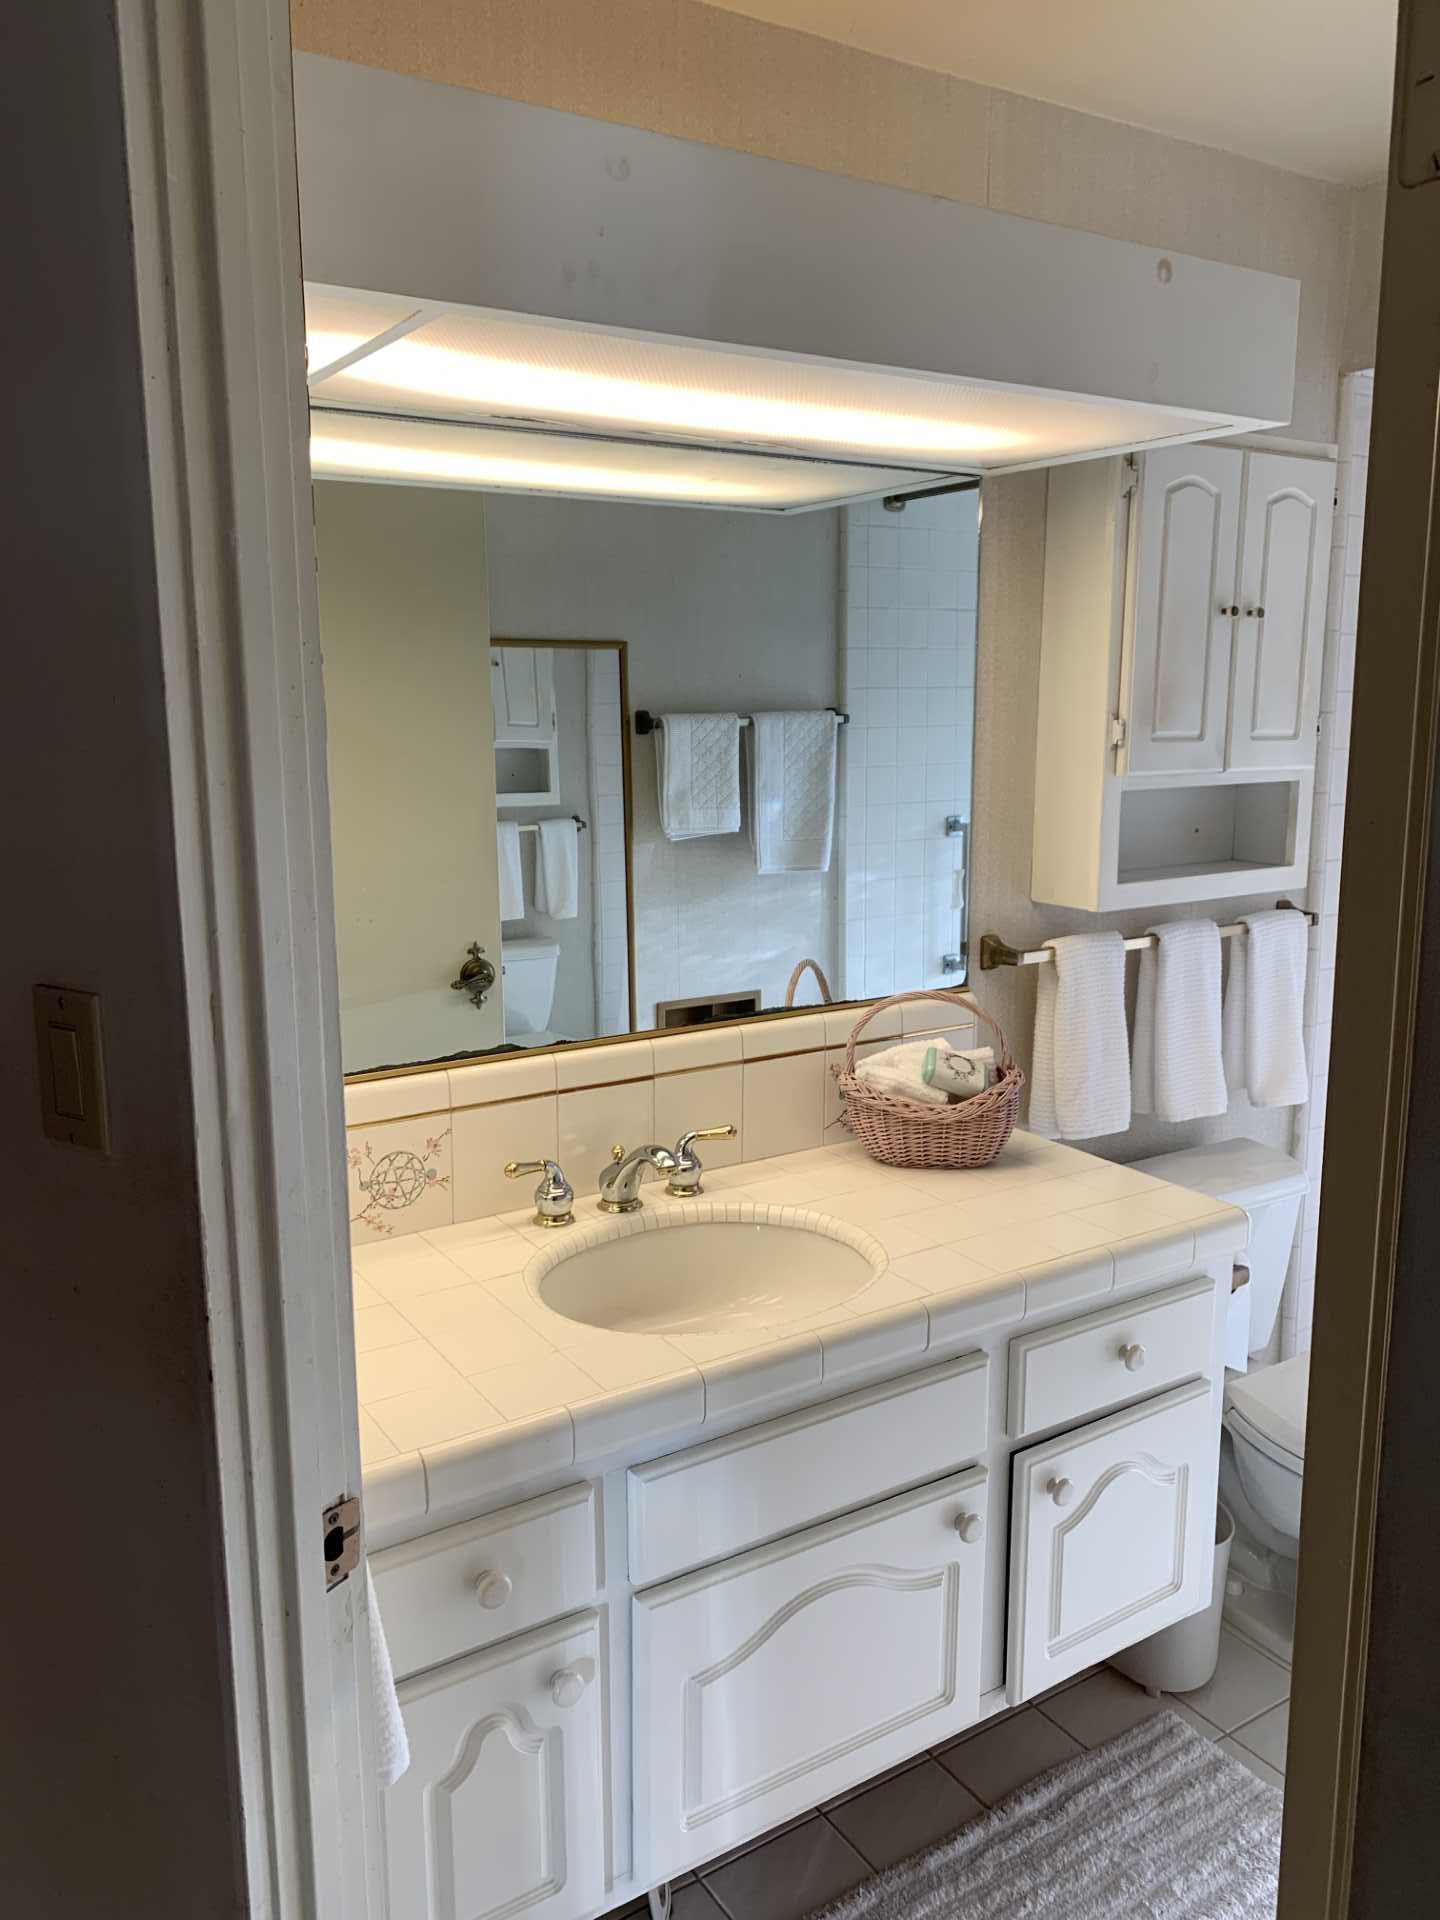 BEFORE - The dated main bathroom had a lightbox above a vanity with a tiled countertop, while the step-down shower had a glass block wall.